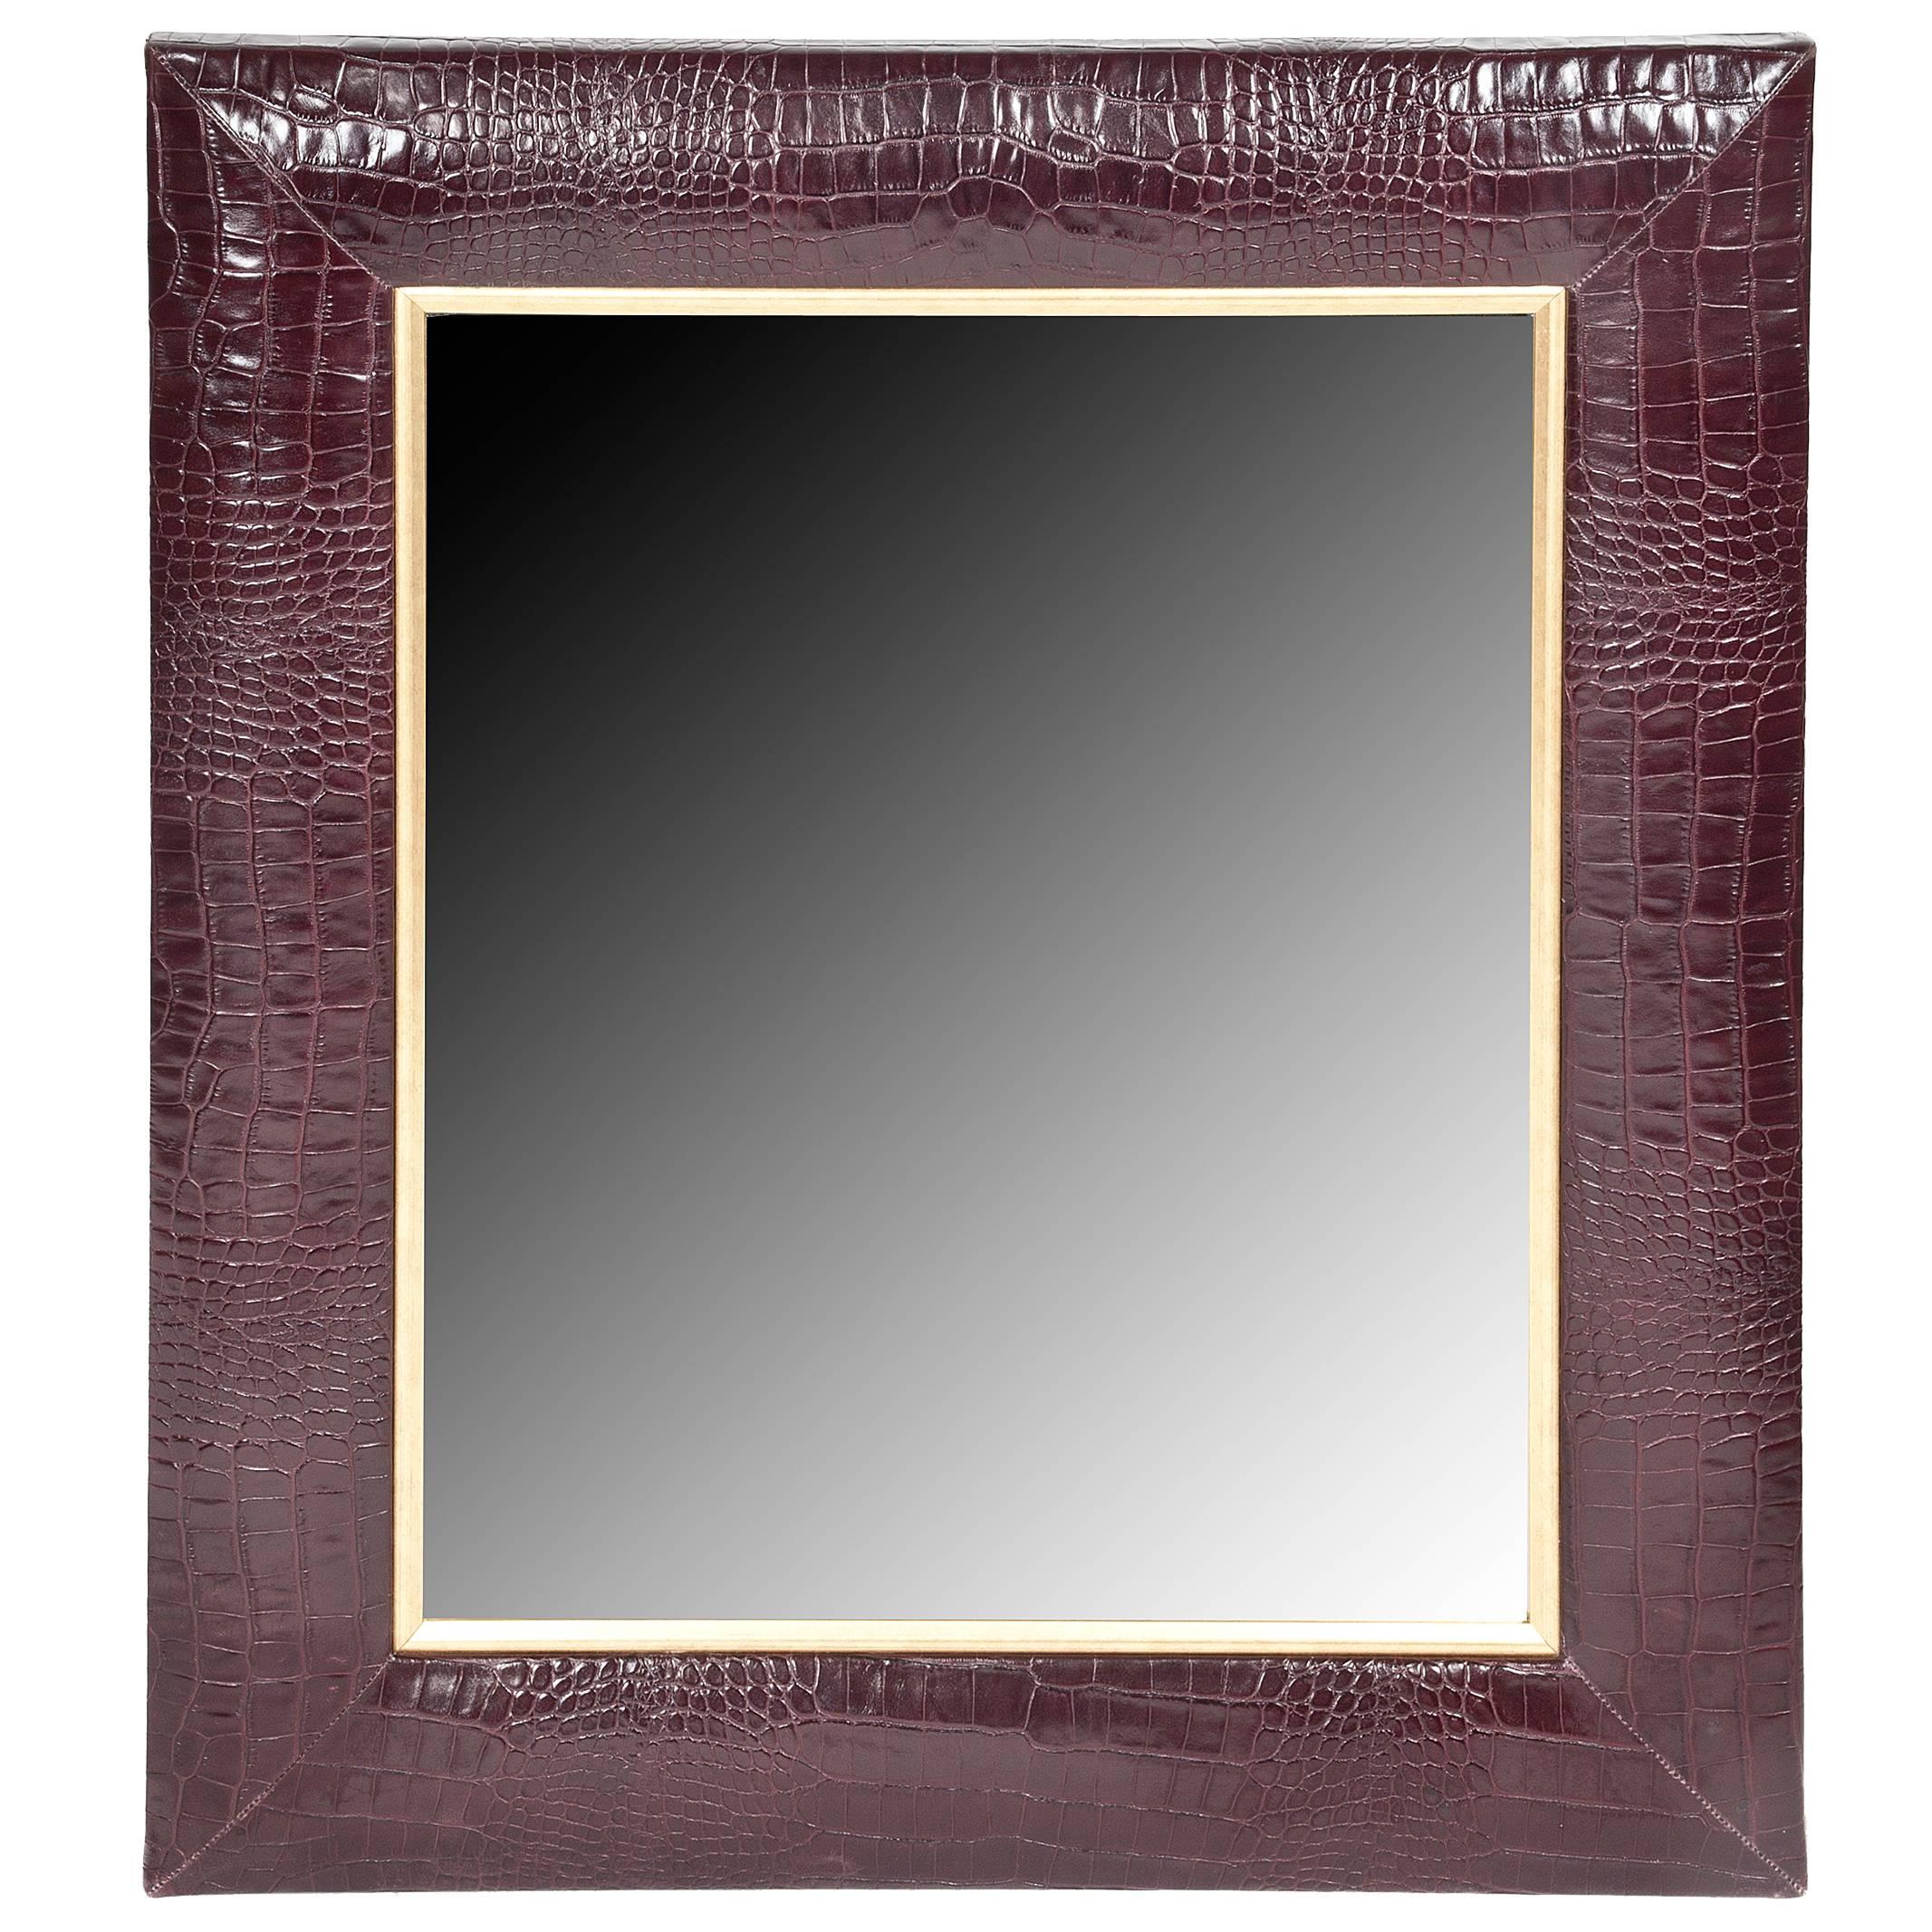 Bordeaux Croc Embossed Leather Framed Mirror with Champagne Gold Detailing For Sale